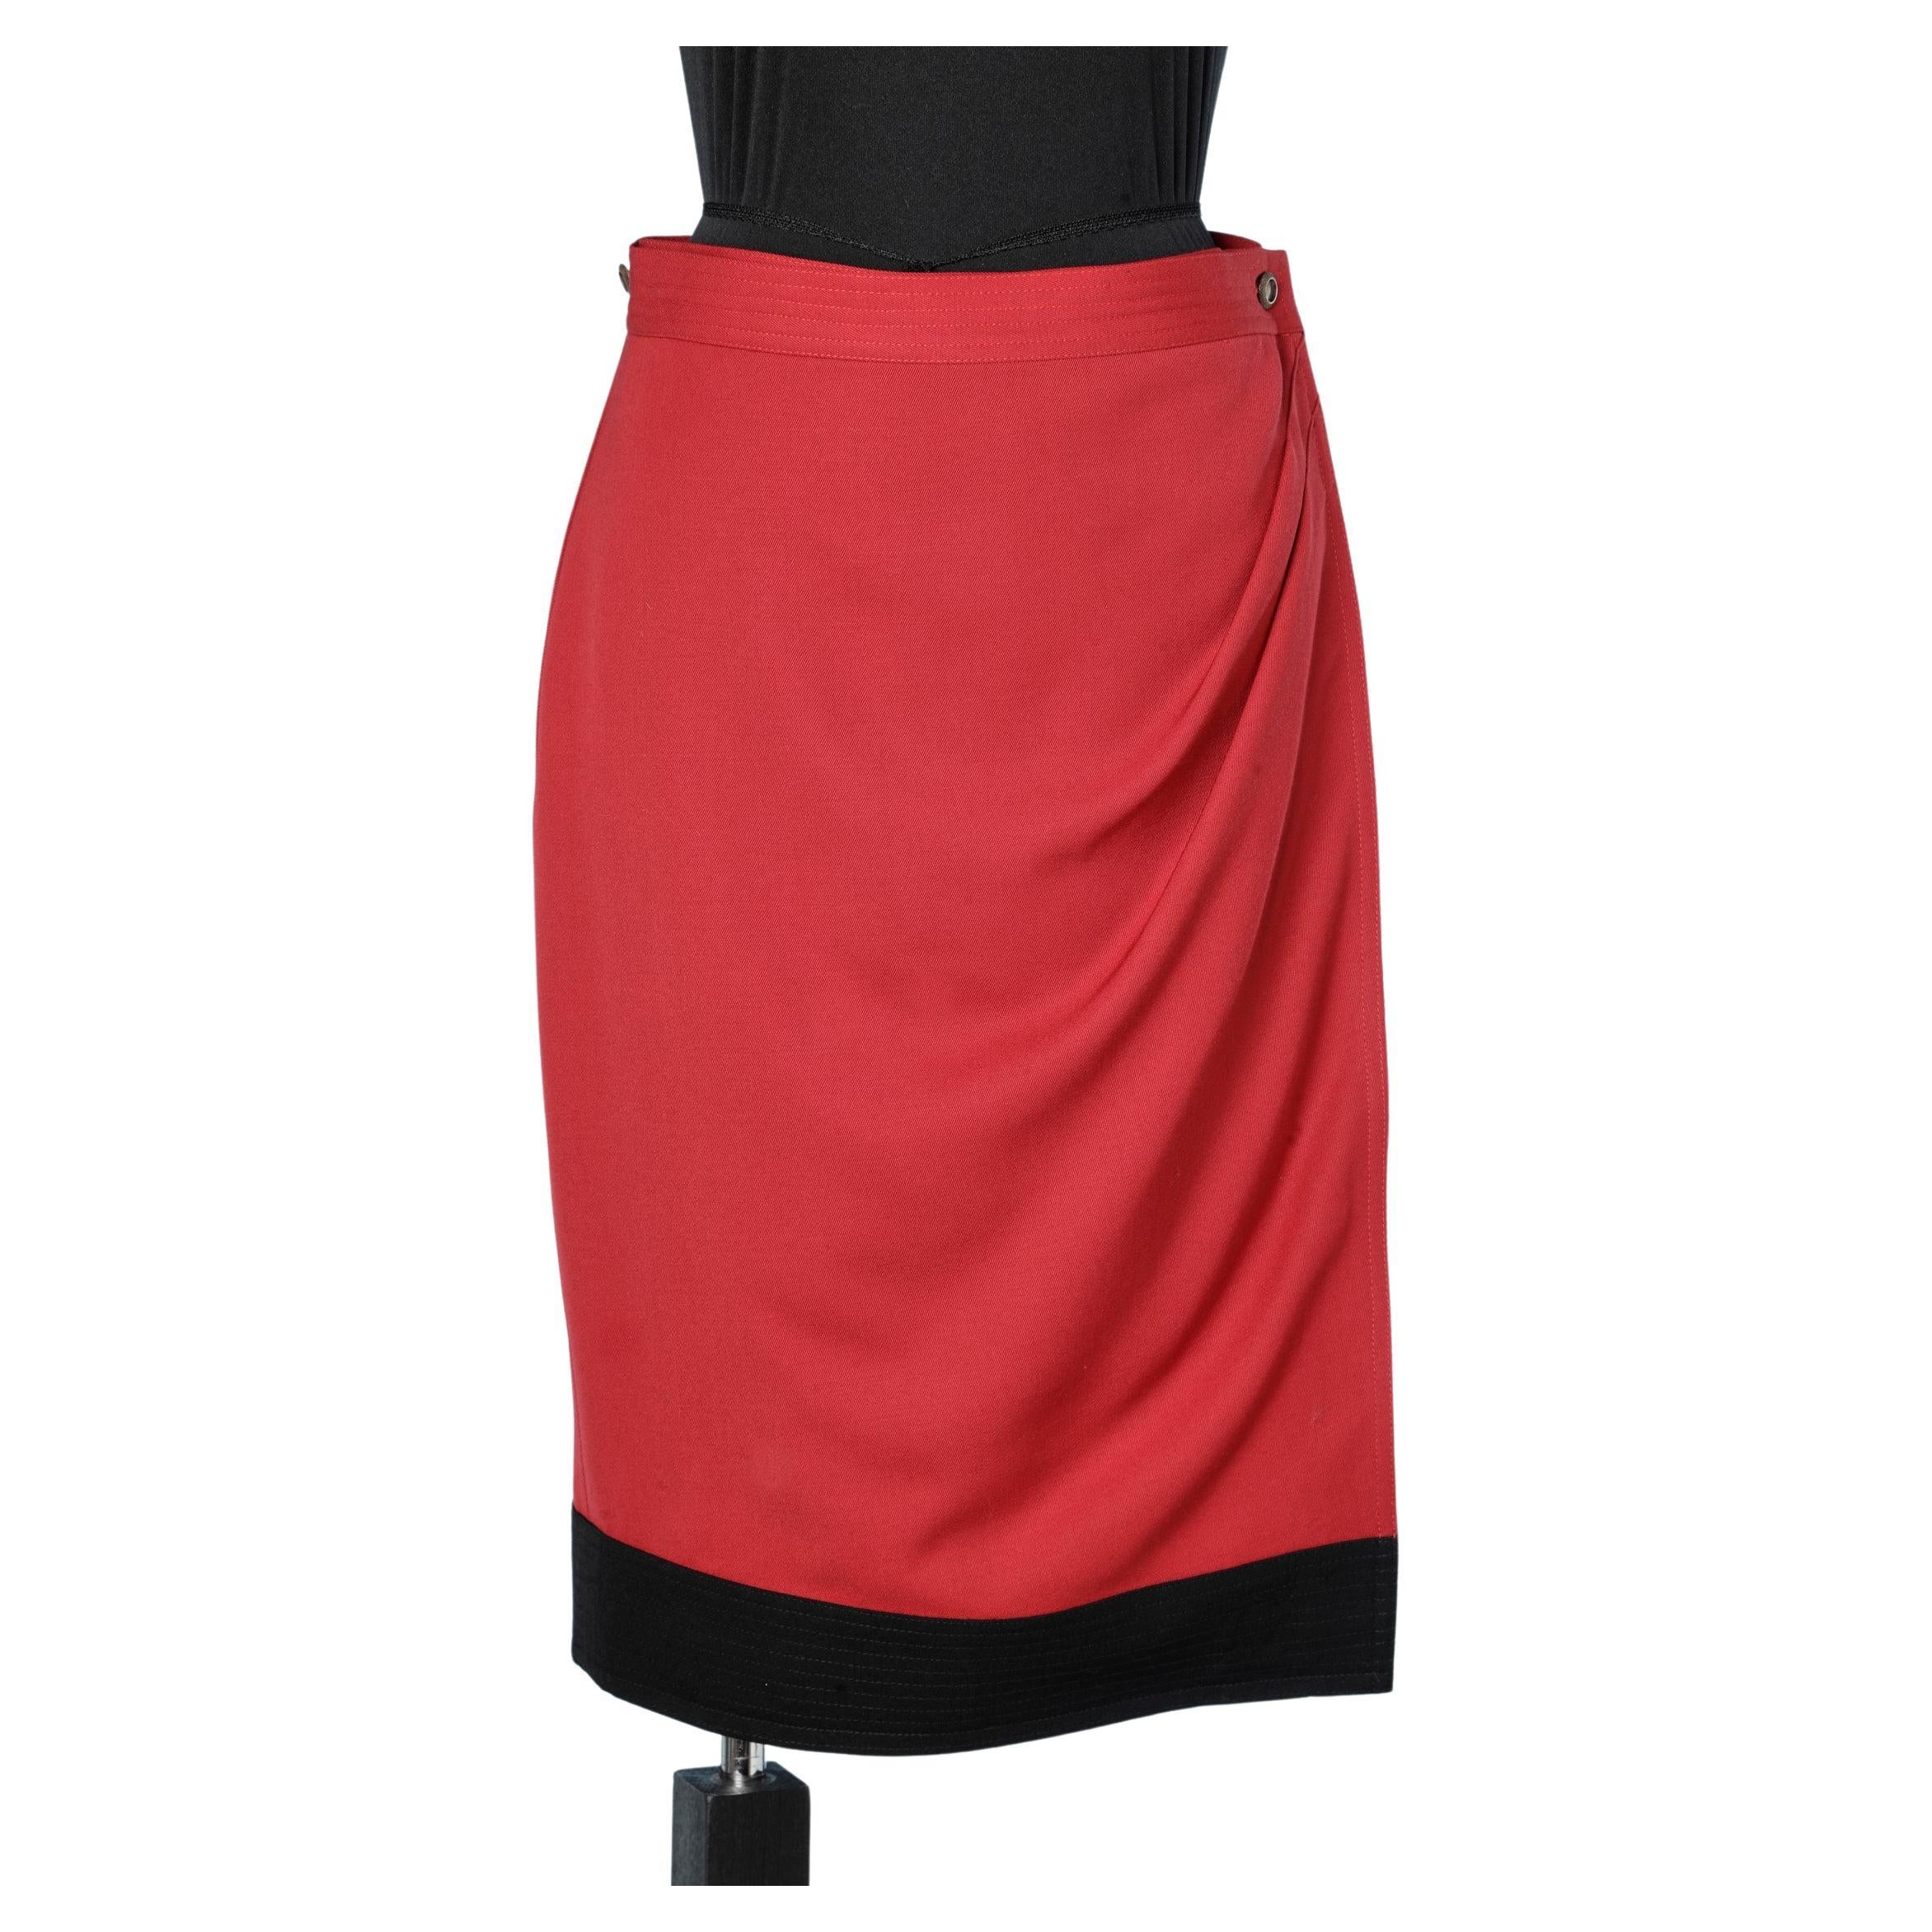 Wrap skirt in red wool and black strip in the bottom edge Gianni Versace 